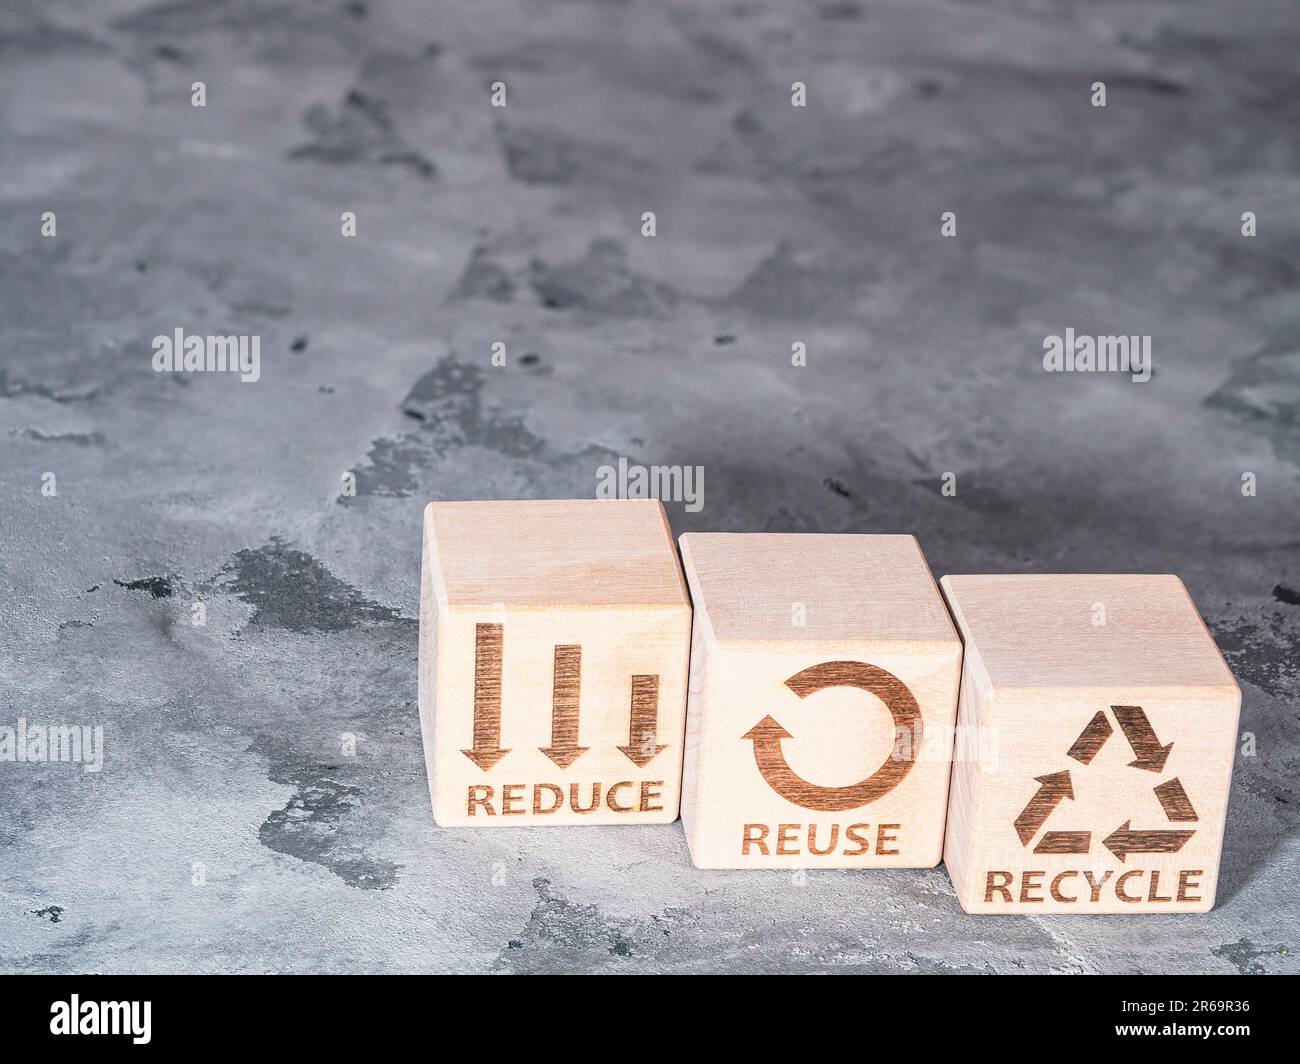 Reduce, Reuse, and Recycle symbols as a concept of environmental conservation business strategy Stock Photo